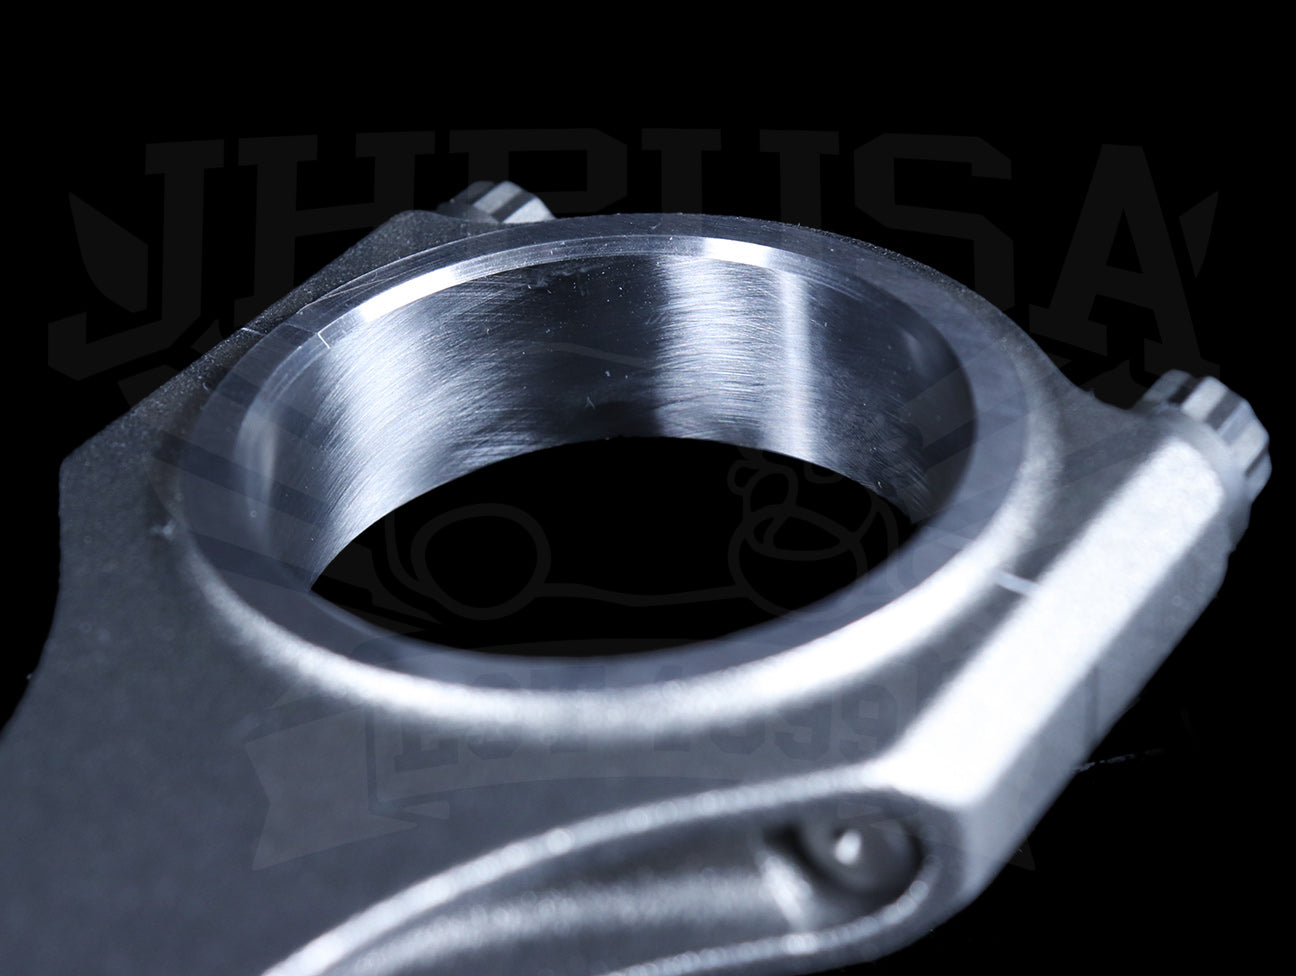 Supertech Forged Connecting Rods - K-series